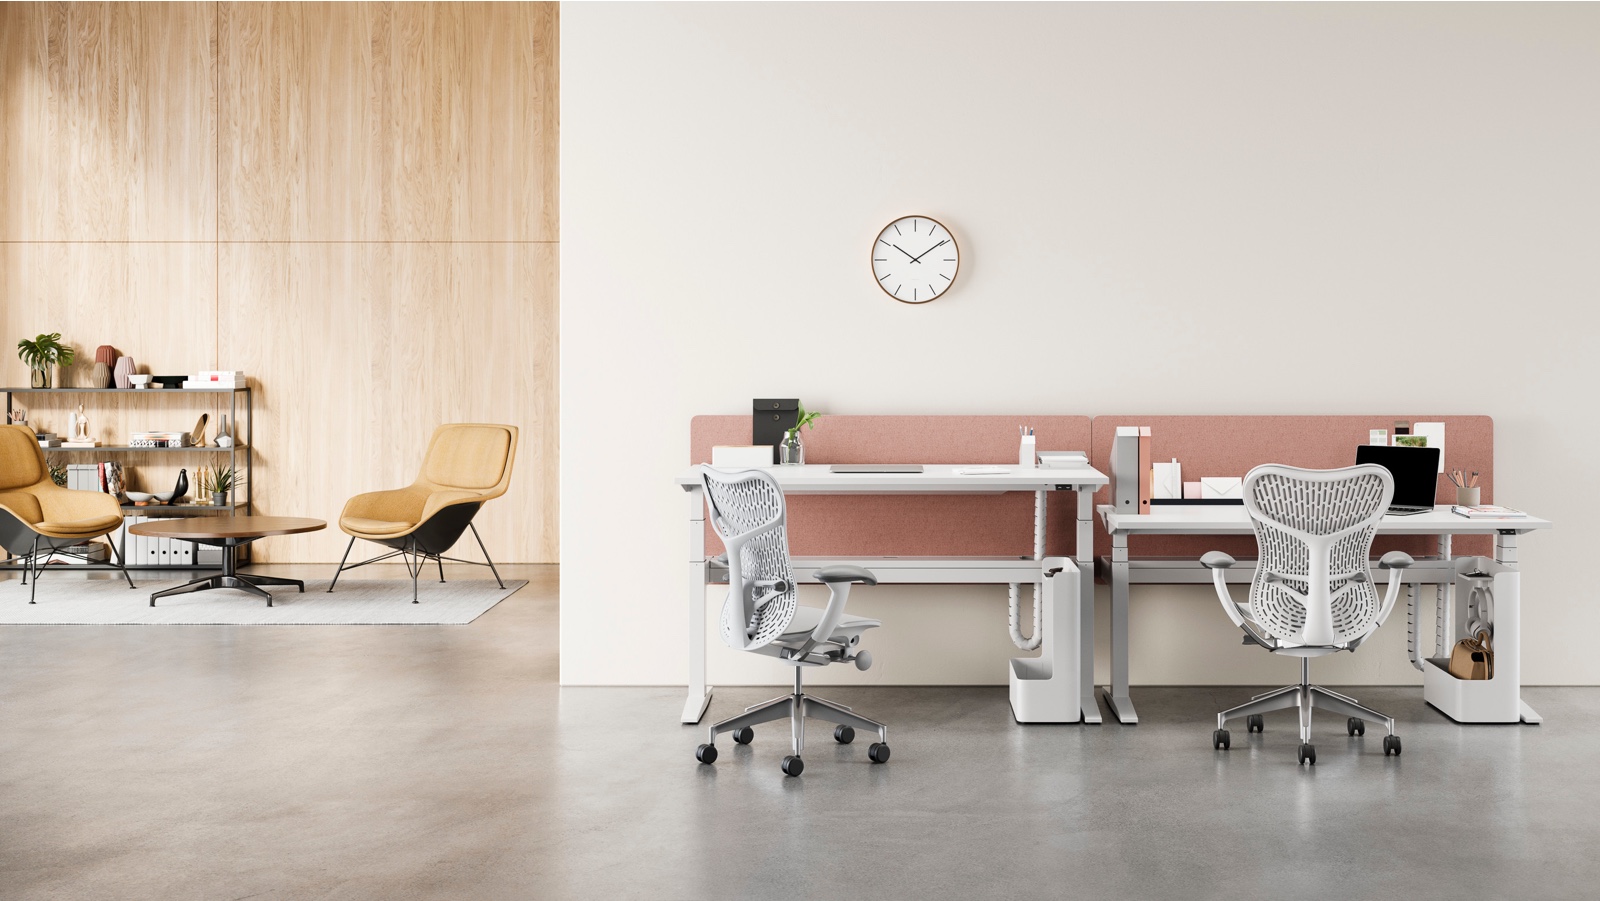 An office setting with a pair of Ratio desks in the foreground with white rectangular work surfaces and grey Mirra 2 chairs, and a lounge area with Striad lounge chairs, a Civic table and a bookcase in the background. One of the desks is raised to standing height.